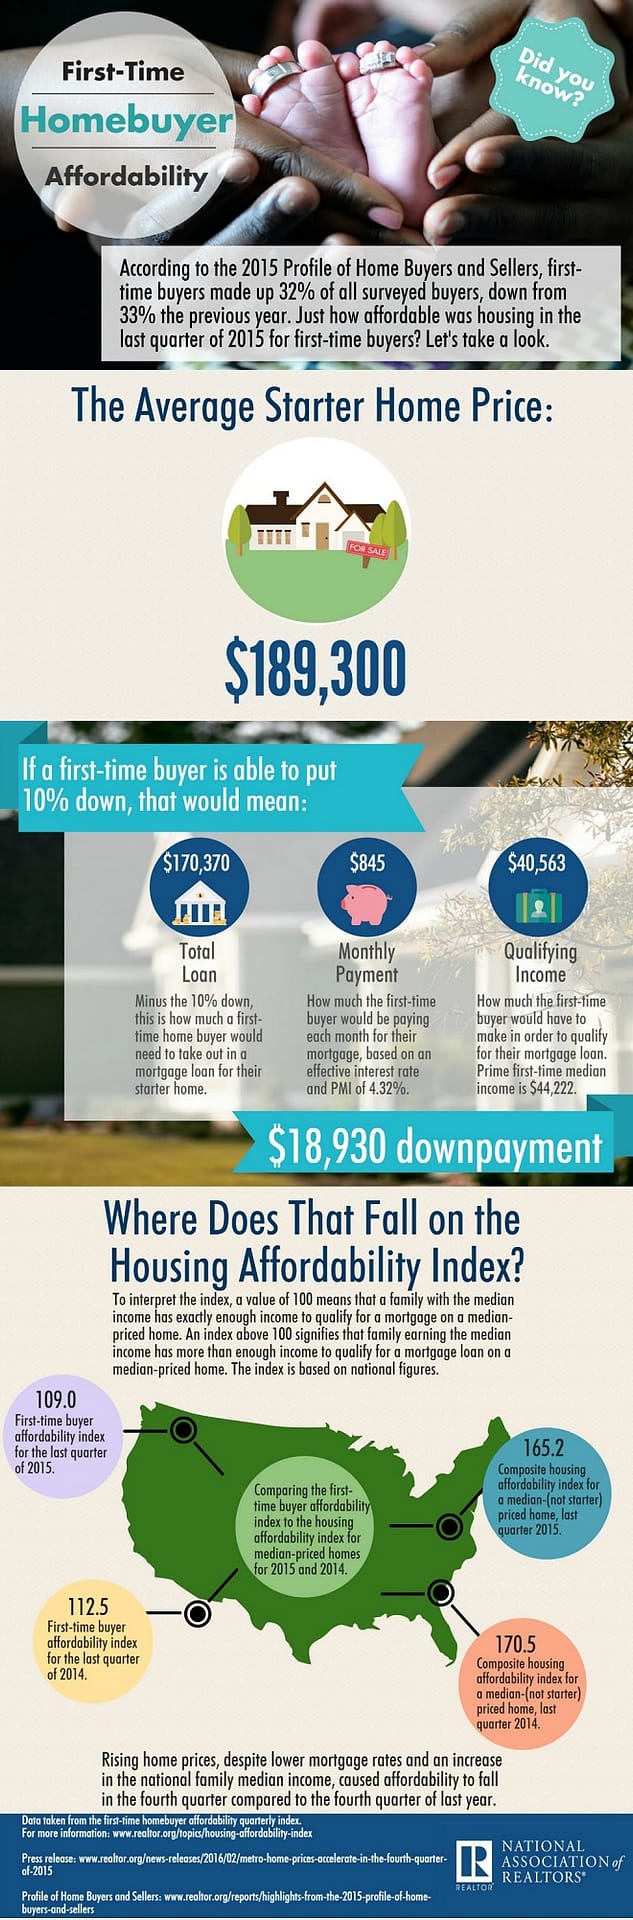 First-time Homebuyer Affordability Infographic